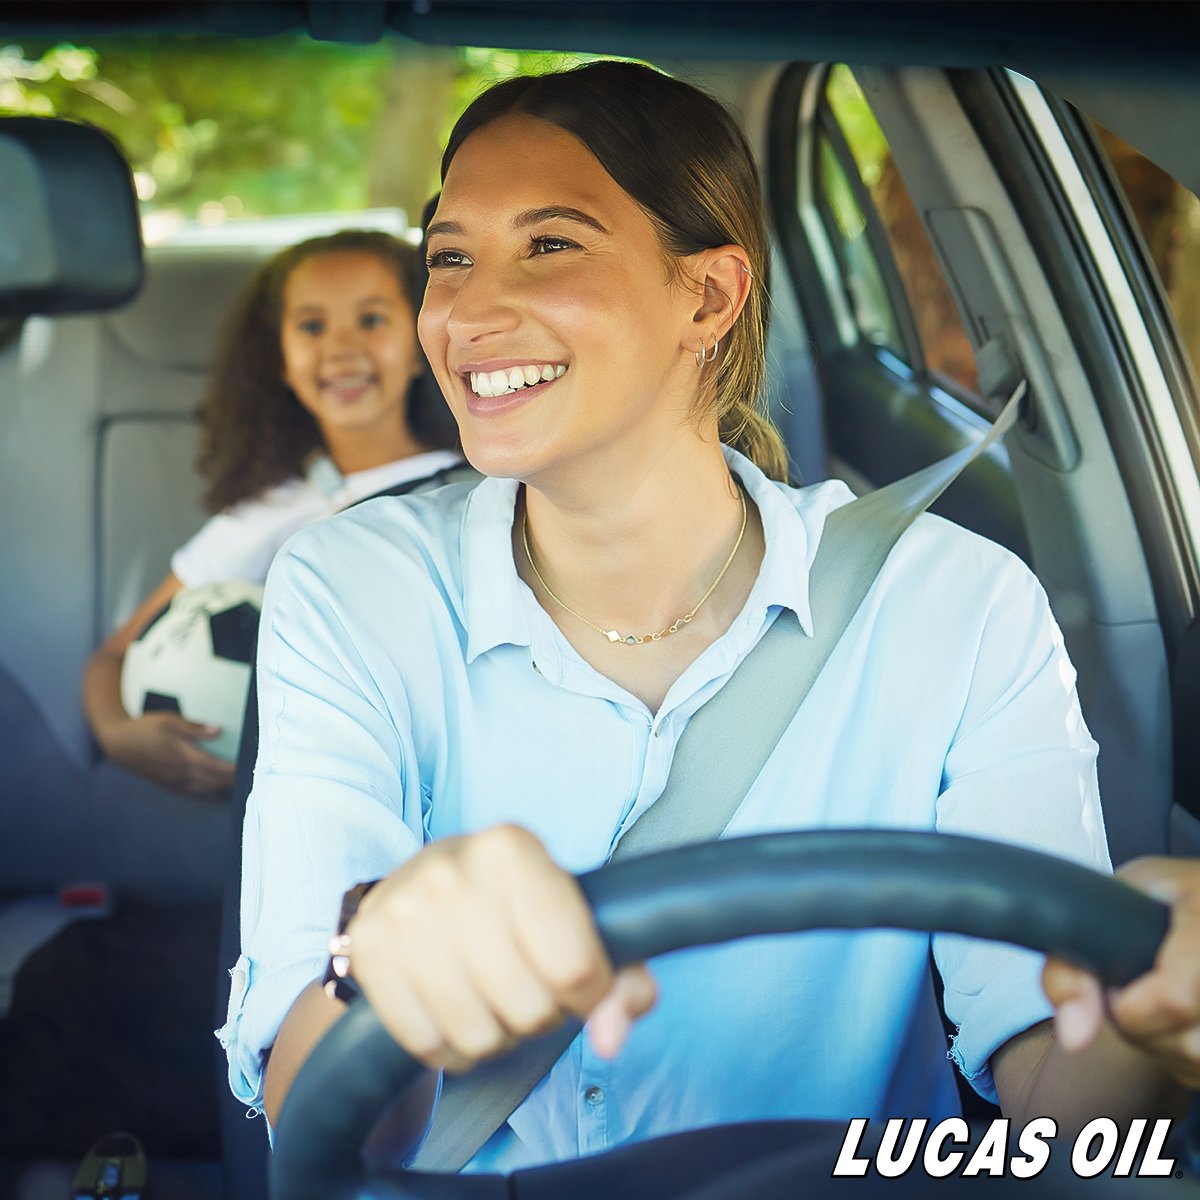 💪 Shoutout to the ultimate multitaskers: Moms! 👩‍👧‍👦

🚙💨 From managing schedules to getting everyone where they need to be, your love, strength, and dedication inspire us every day! Happy Mother's Day from Lucas Oil! 💐

#LucasWorks #MothersDay #MomsRule #MomsDay